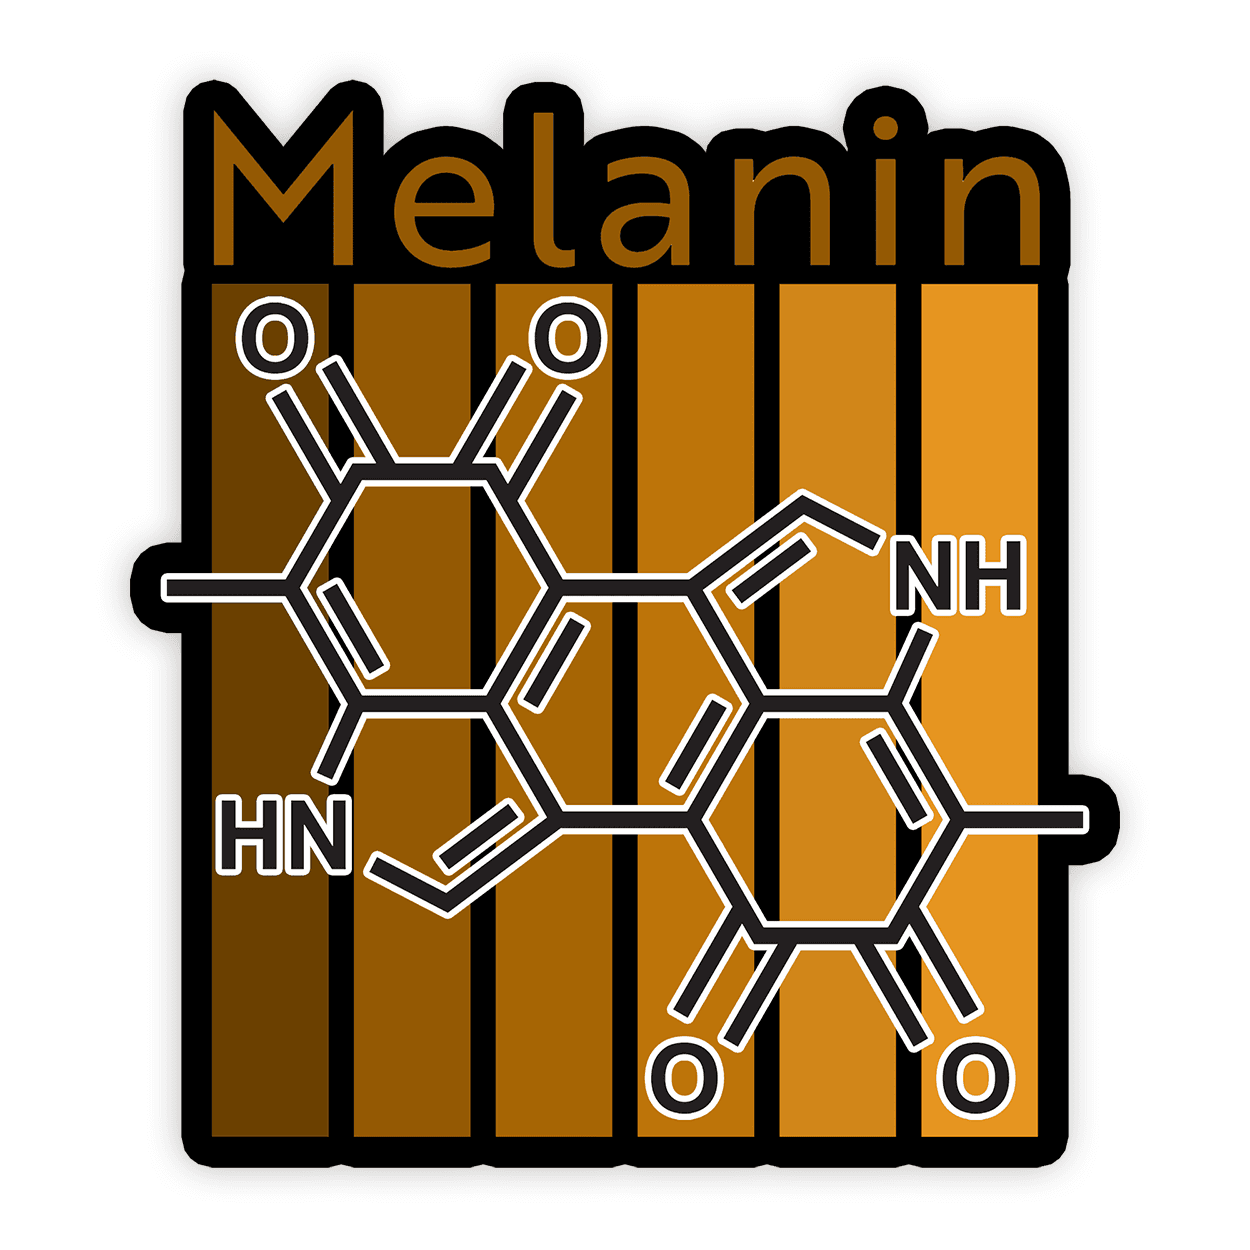 Image of a vinyl sticker that is 3 inch on its longest side with different shade of melanin and the molecular structure of melanin